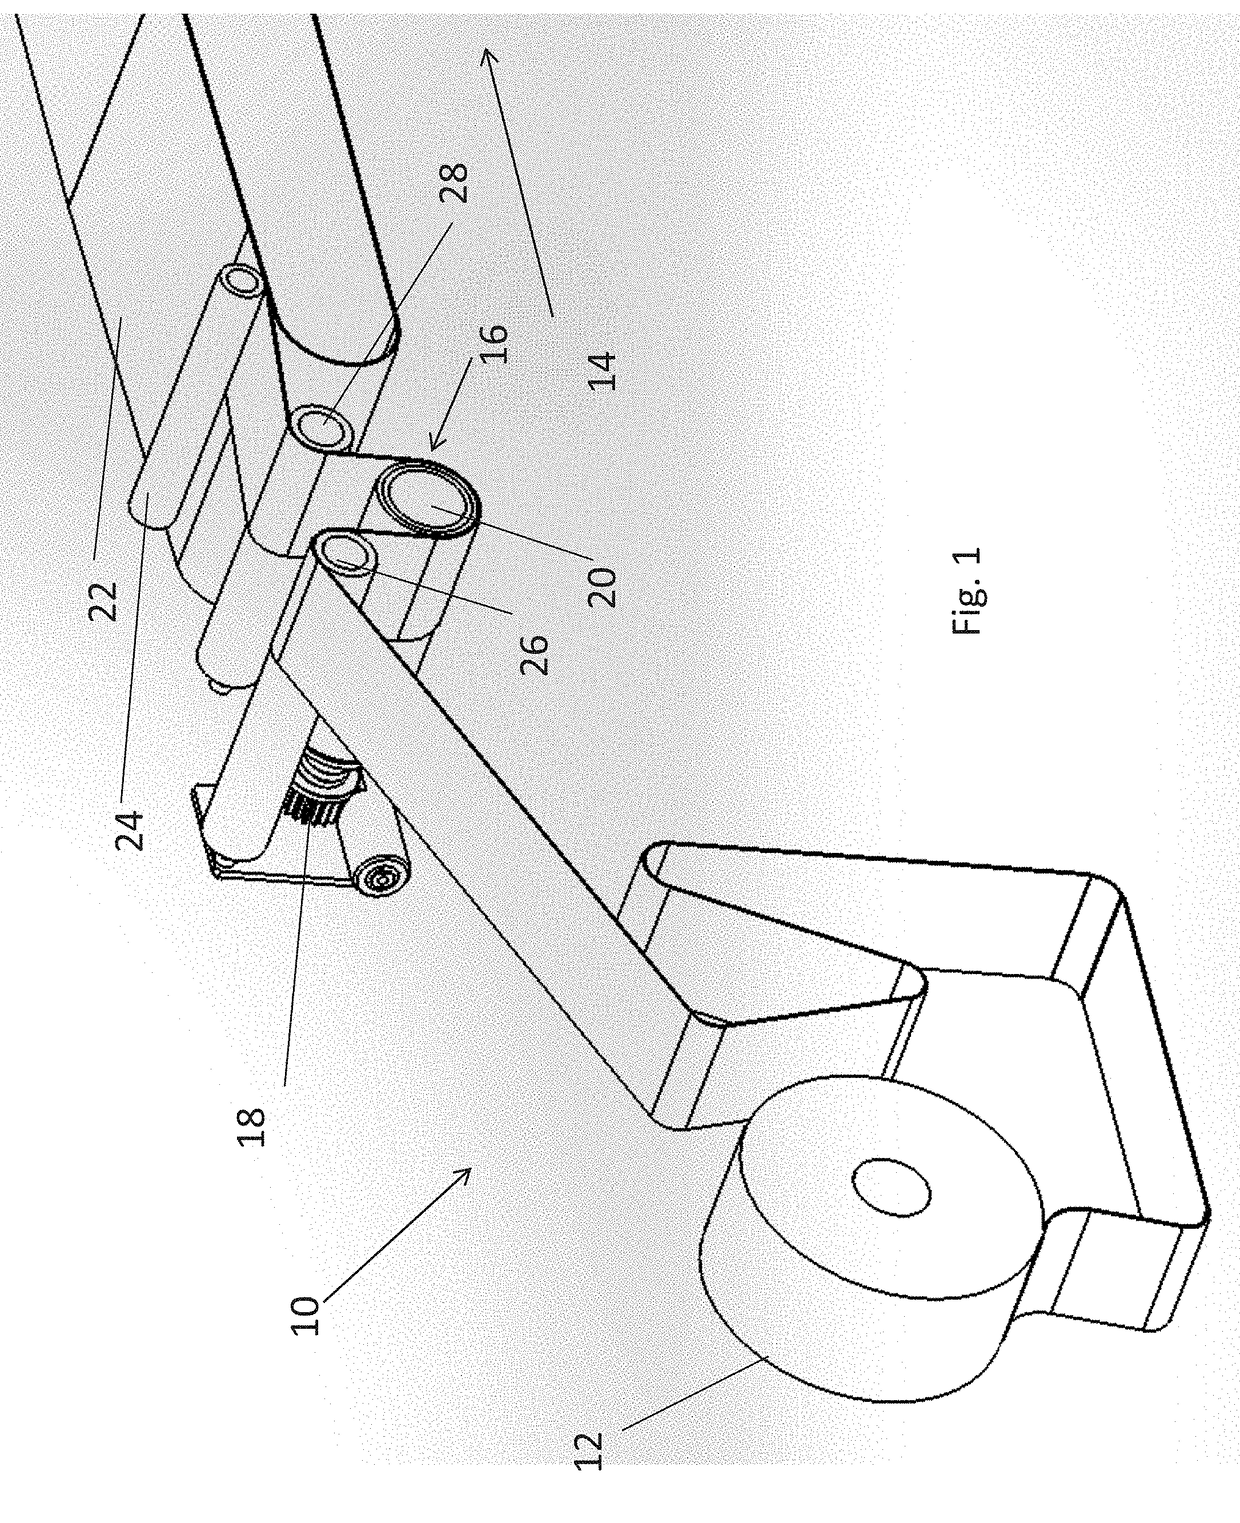 Tensioning mechanism for a textile feed to a stepped operation digital textile printer